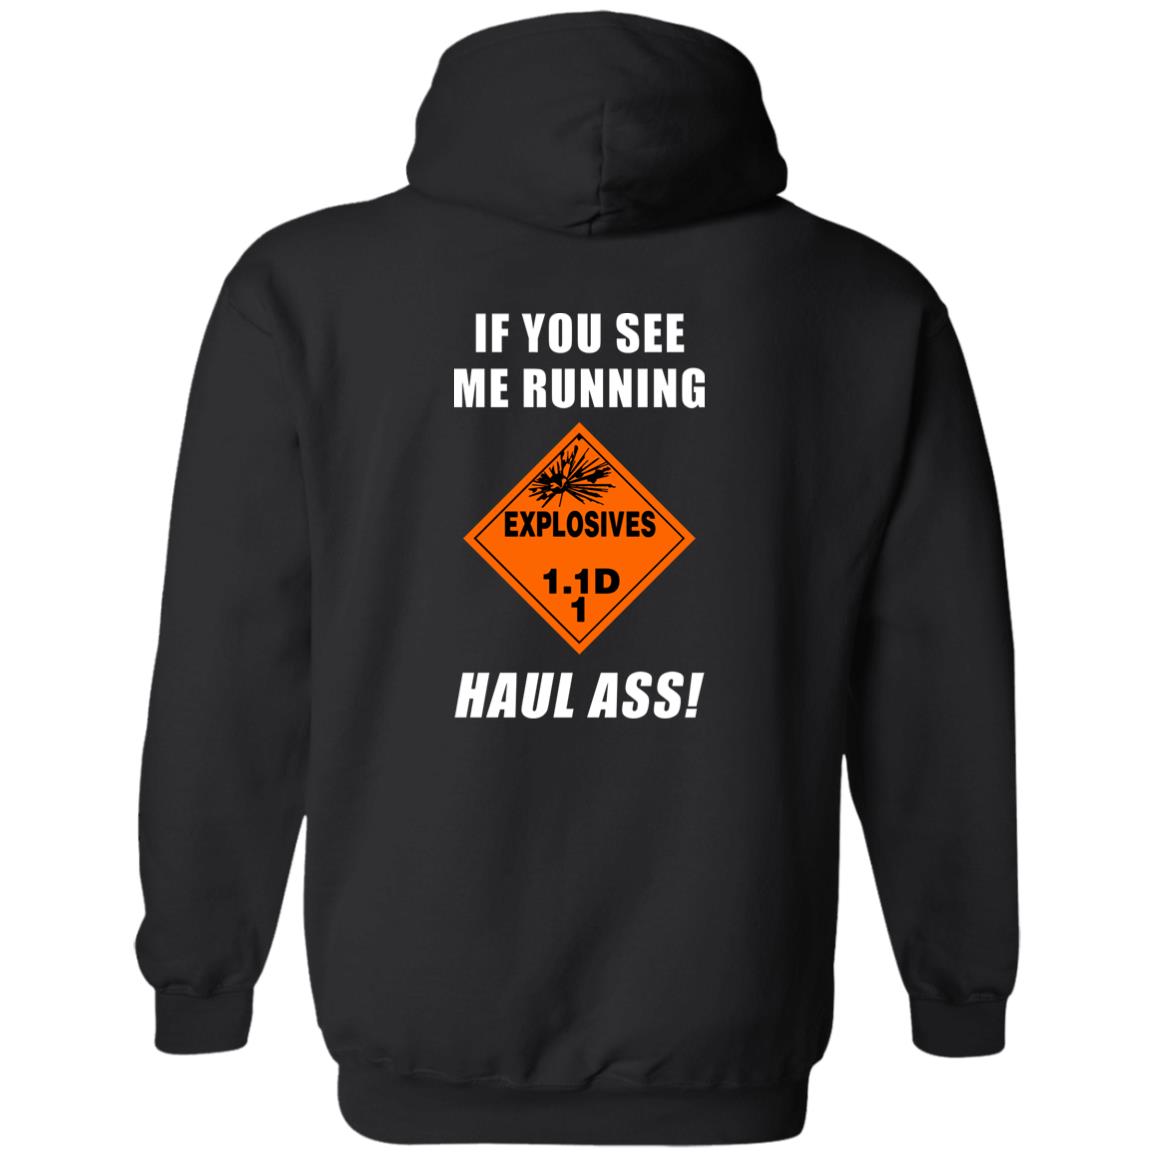 USAF AMMO IYAAYAS Explosive Placard 1.1D If You See Me Running Haul Ass Pisspot Munitions Gift Unisex Pullover Hoodie